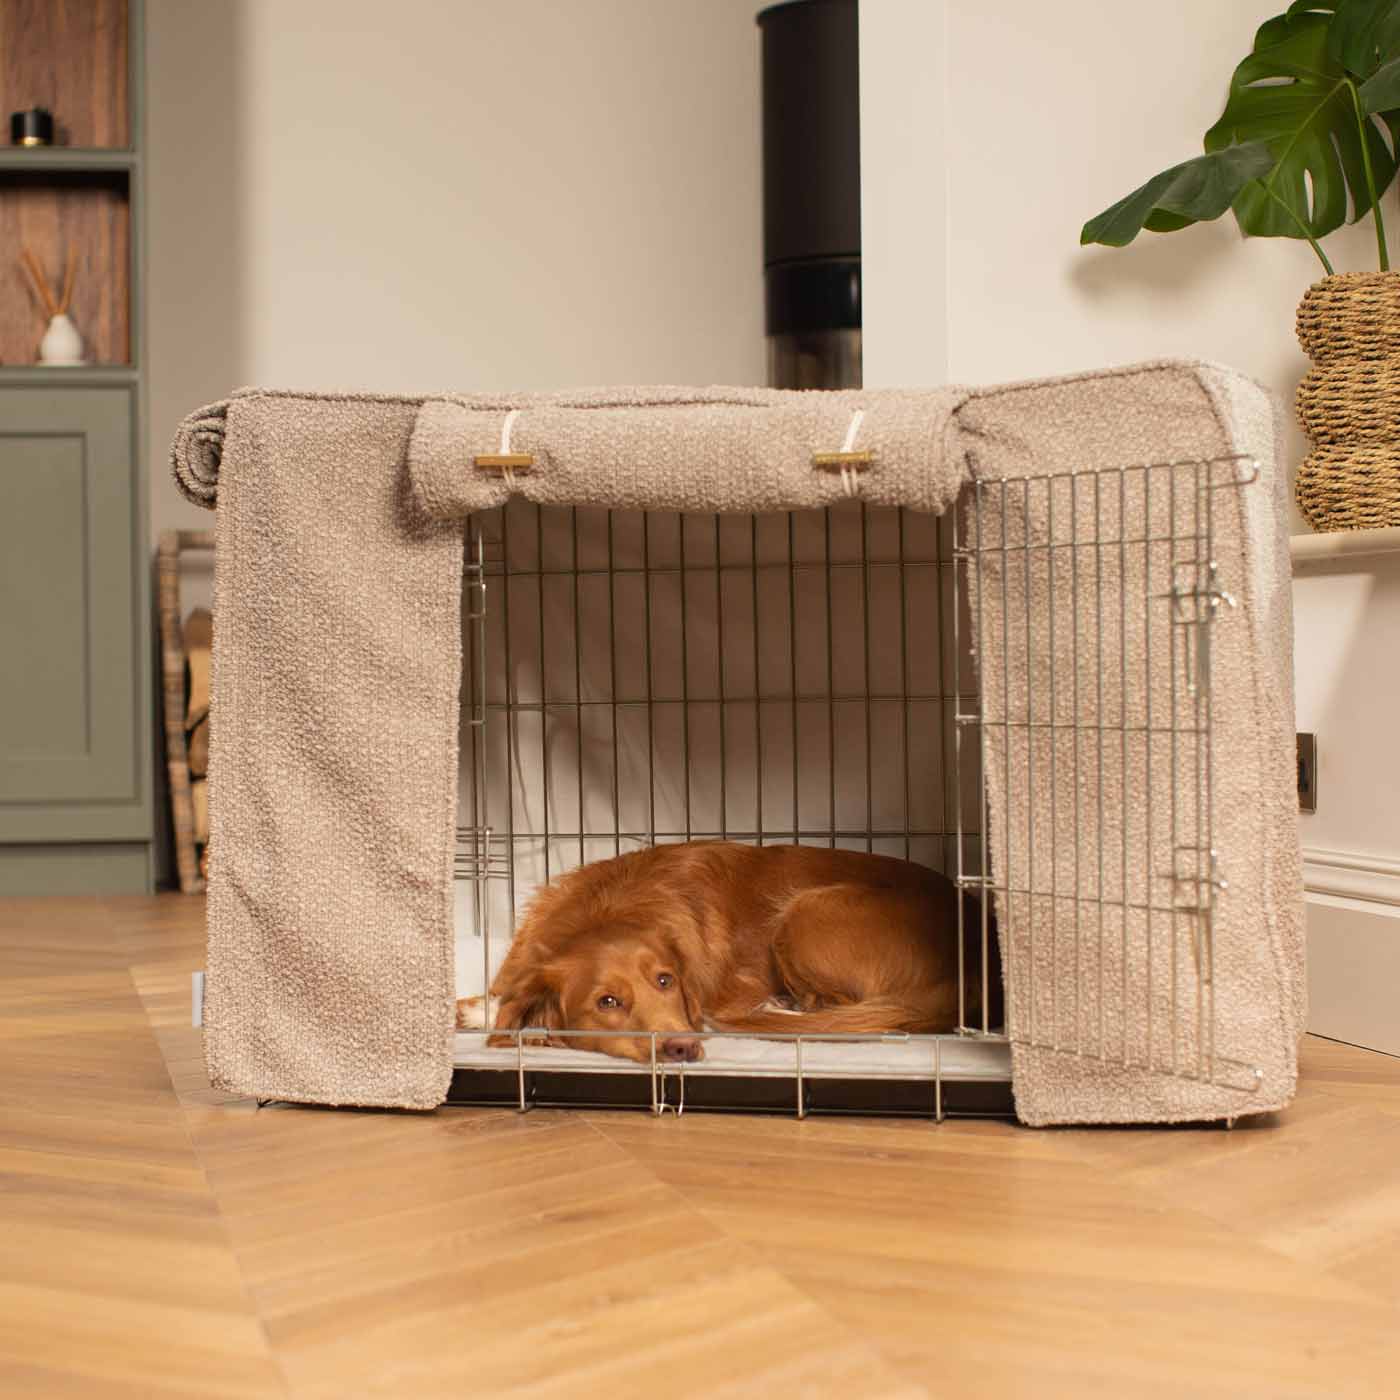 Dog Cage Cover in Mink Bouclé by Lords & Labradors